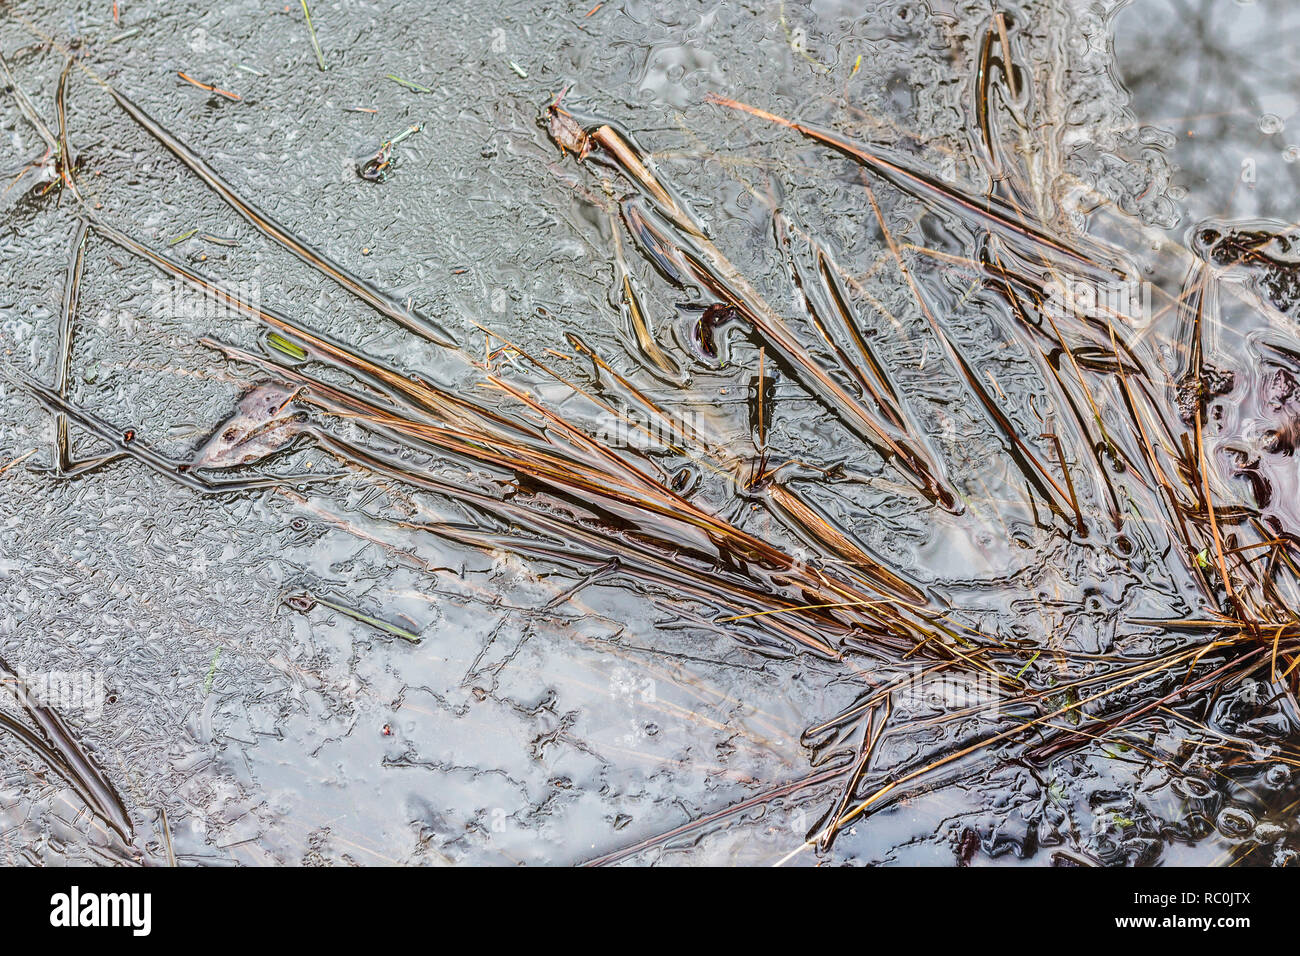 Detail of grasses and bits of vegetation in a frozen pond, with a complex, textured pattern of lines, channels and ridges along the icy surface. Stock Photo